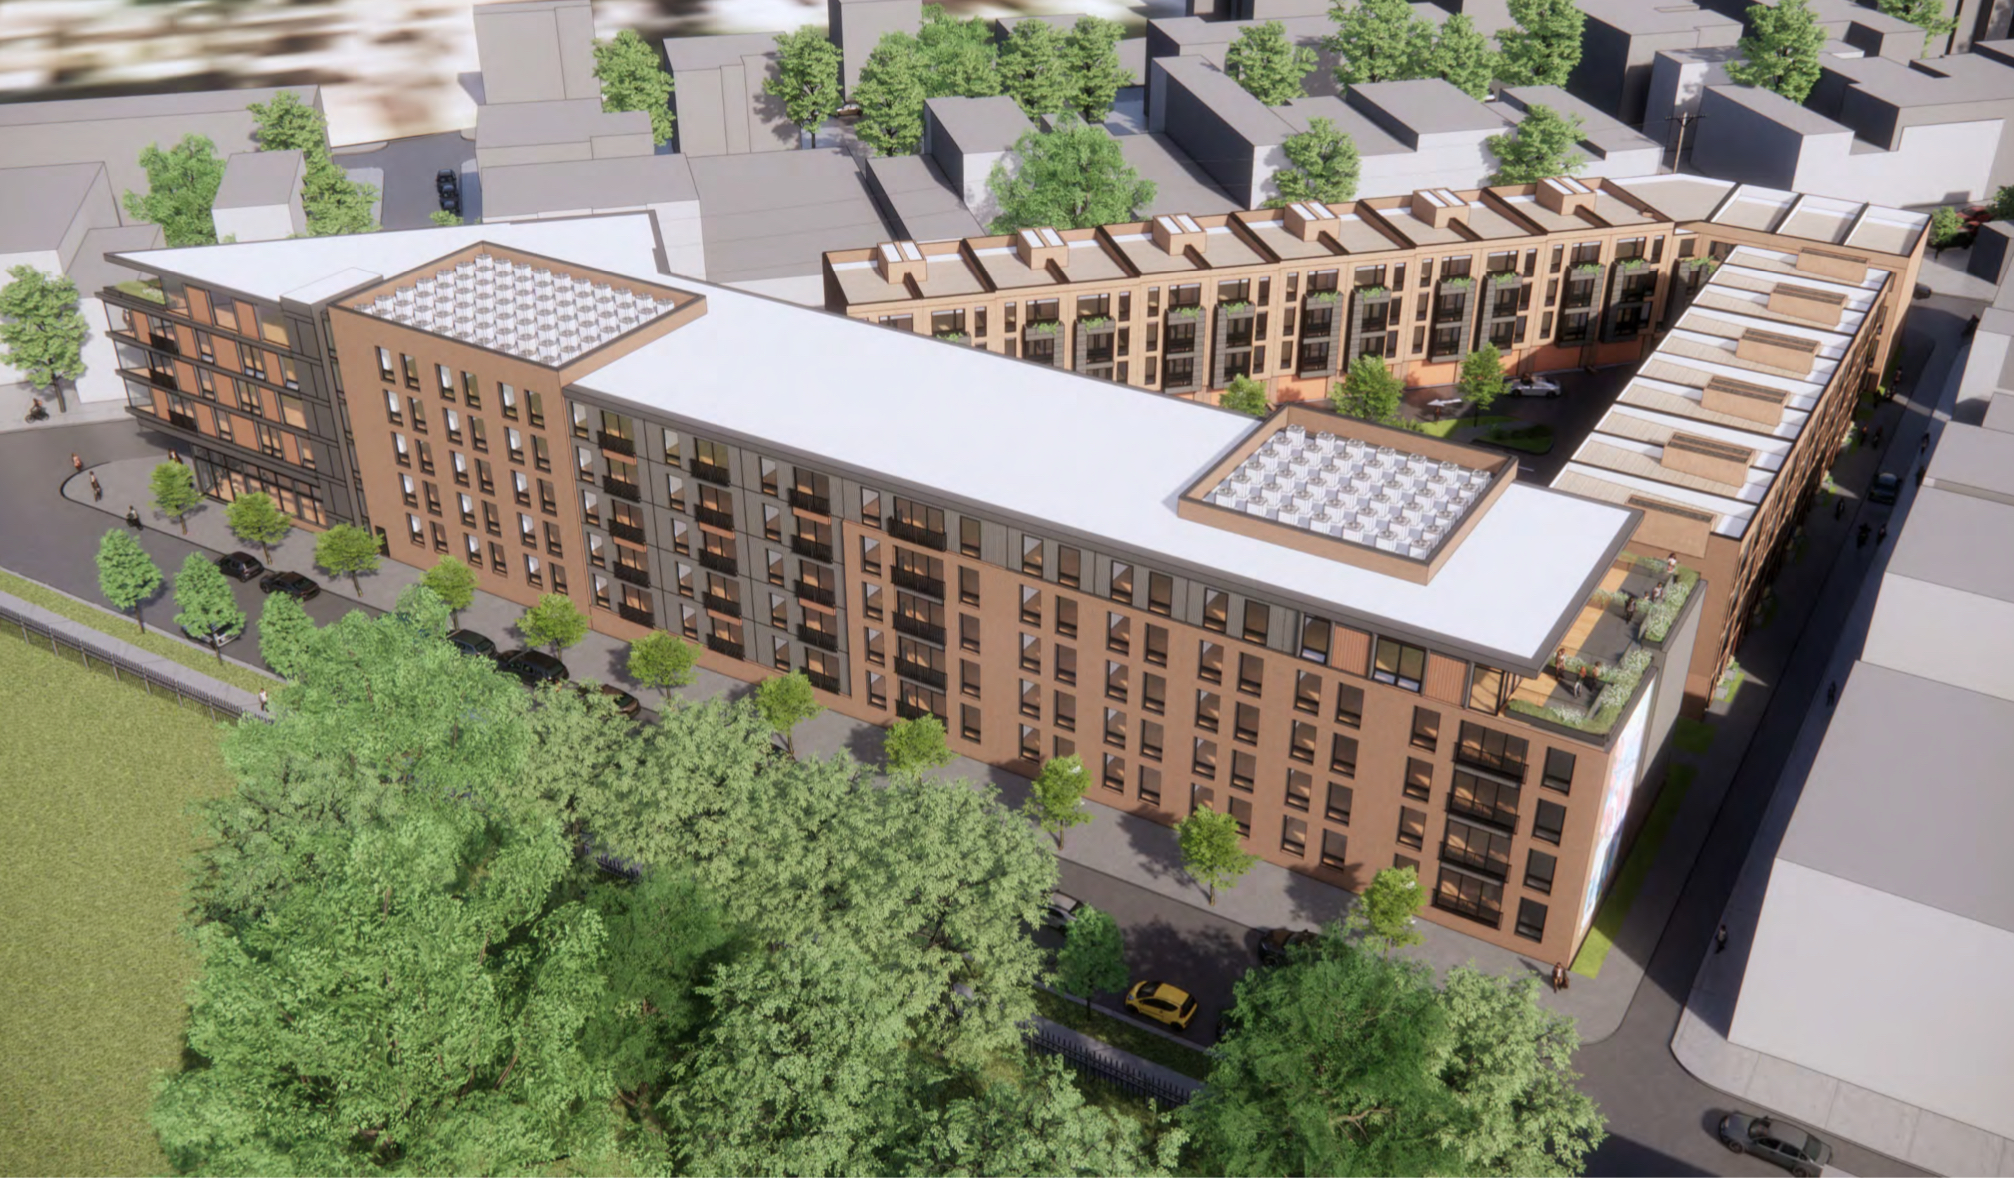 Rendering of 801 North 19th Street. Credit: NORR.